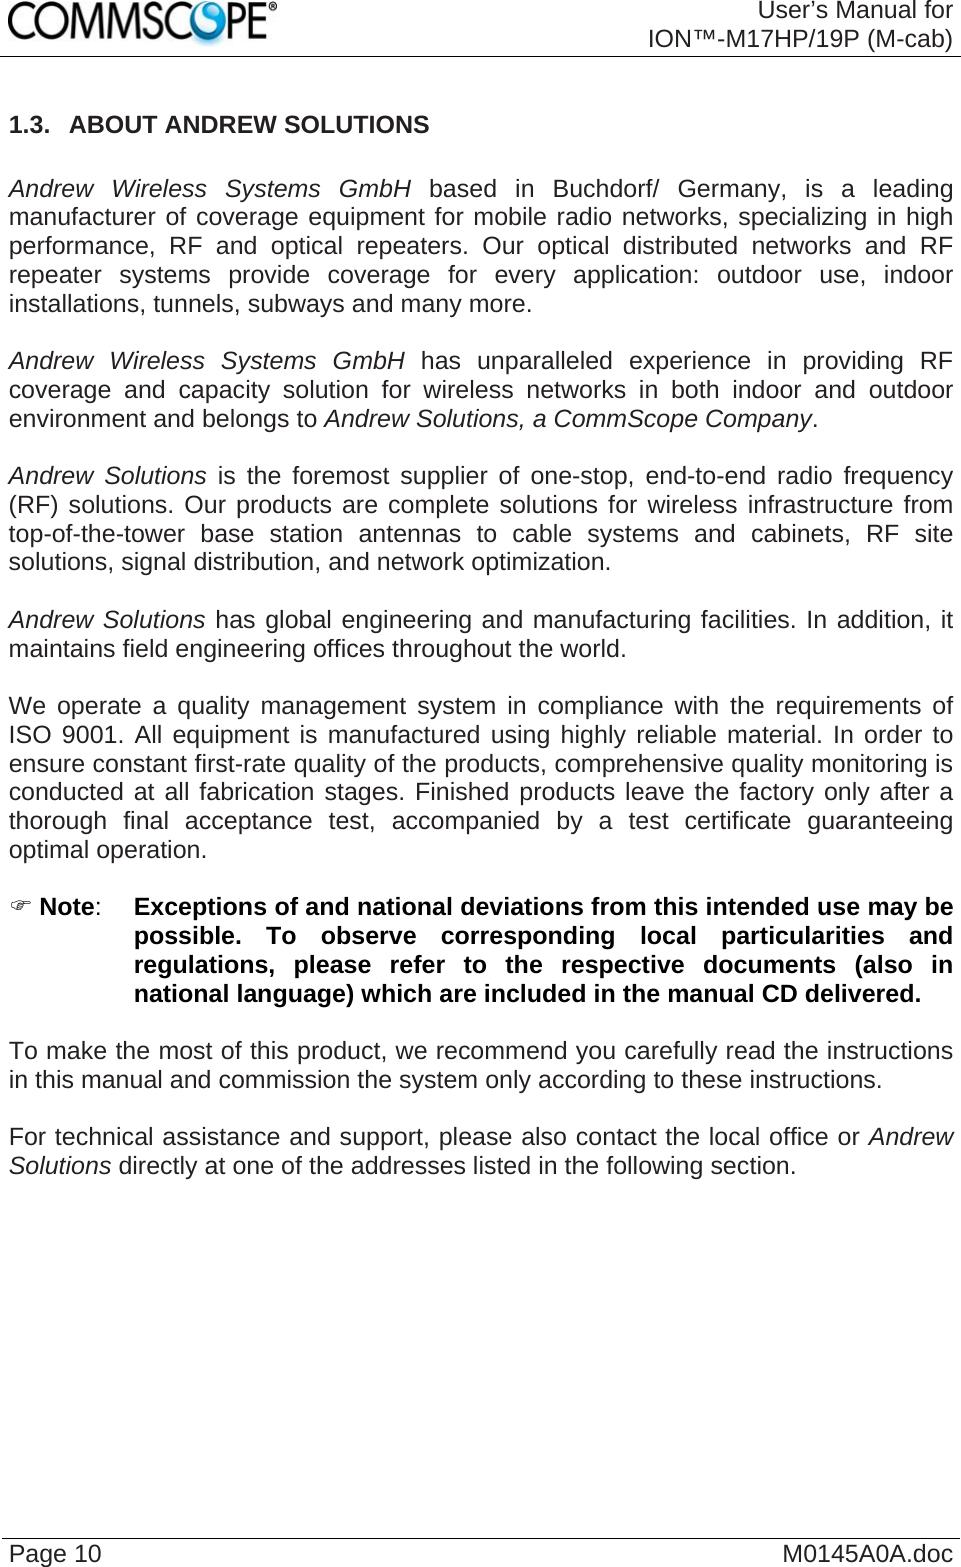  User’s Manual forION™-M17HP/19P (M-cab) Page 10  M0145A0A.doc 1.3.  ABOUT ANDREW SOLUTIONS   Andrew Wireless Systems GmbH based in Buchdorf/ Germany, is a leading manufacturer of coverage equipment for mobile radio networks, specializing in high performance, RF and optical repeaters. Our optical distributed networks and RF repeater systems provide coverage for every application: outdoor use, indoor installations, tunnels, subways and many more.  Andrew Wireless Systems GmbH has unparalleled experience in providing RF coverage and capacity solution for wireless networks in both indoor and outdoor environment and belongs to Andrew Solutions, a CommScope Company.  Andrew Solutions is the foremost supplier of one-stop, end-to-end radio frequency (RF) solutions. Our products are complete solutions for wireless infrastructure from top-of-the-tower base station antennas to cable systems and cabinets, RF site solutions, signal distribution, and network optimization.  Andrew Solutions has global engineering and manufacturing facilities. In addition, it maintains field engineering offices throughout the world.  We operate a quality management system in compliance with the requirements of ISO 9001. All equipment is manufactured using highly reliable material. In order to ensure constant first-rate quality of the products, comprehensive quality monitoring is conducted at all fabrication stages. Finished products leave the factory only after a thorough final acceptance test, accompanied by a test certificate guaranteeing optimal operation.  ) Note:  Exceptions of and national deviations from this intended use may be possible. To observe corresponding local particularities and regulations, please refer to the respective documents (also in national language) which are included in the manual CD delivered.  To make the most of this product, we recommend you carefully read the instructions in this manual and commission the system only according to these instructions.   For technical assistance and support, please also contact the local office or Andrew Solutions directly at one of the addresses listed in the following section.  